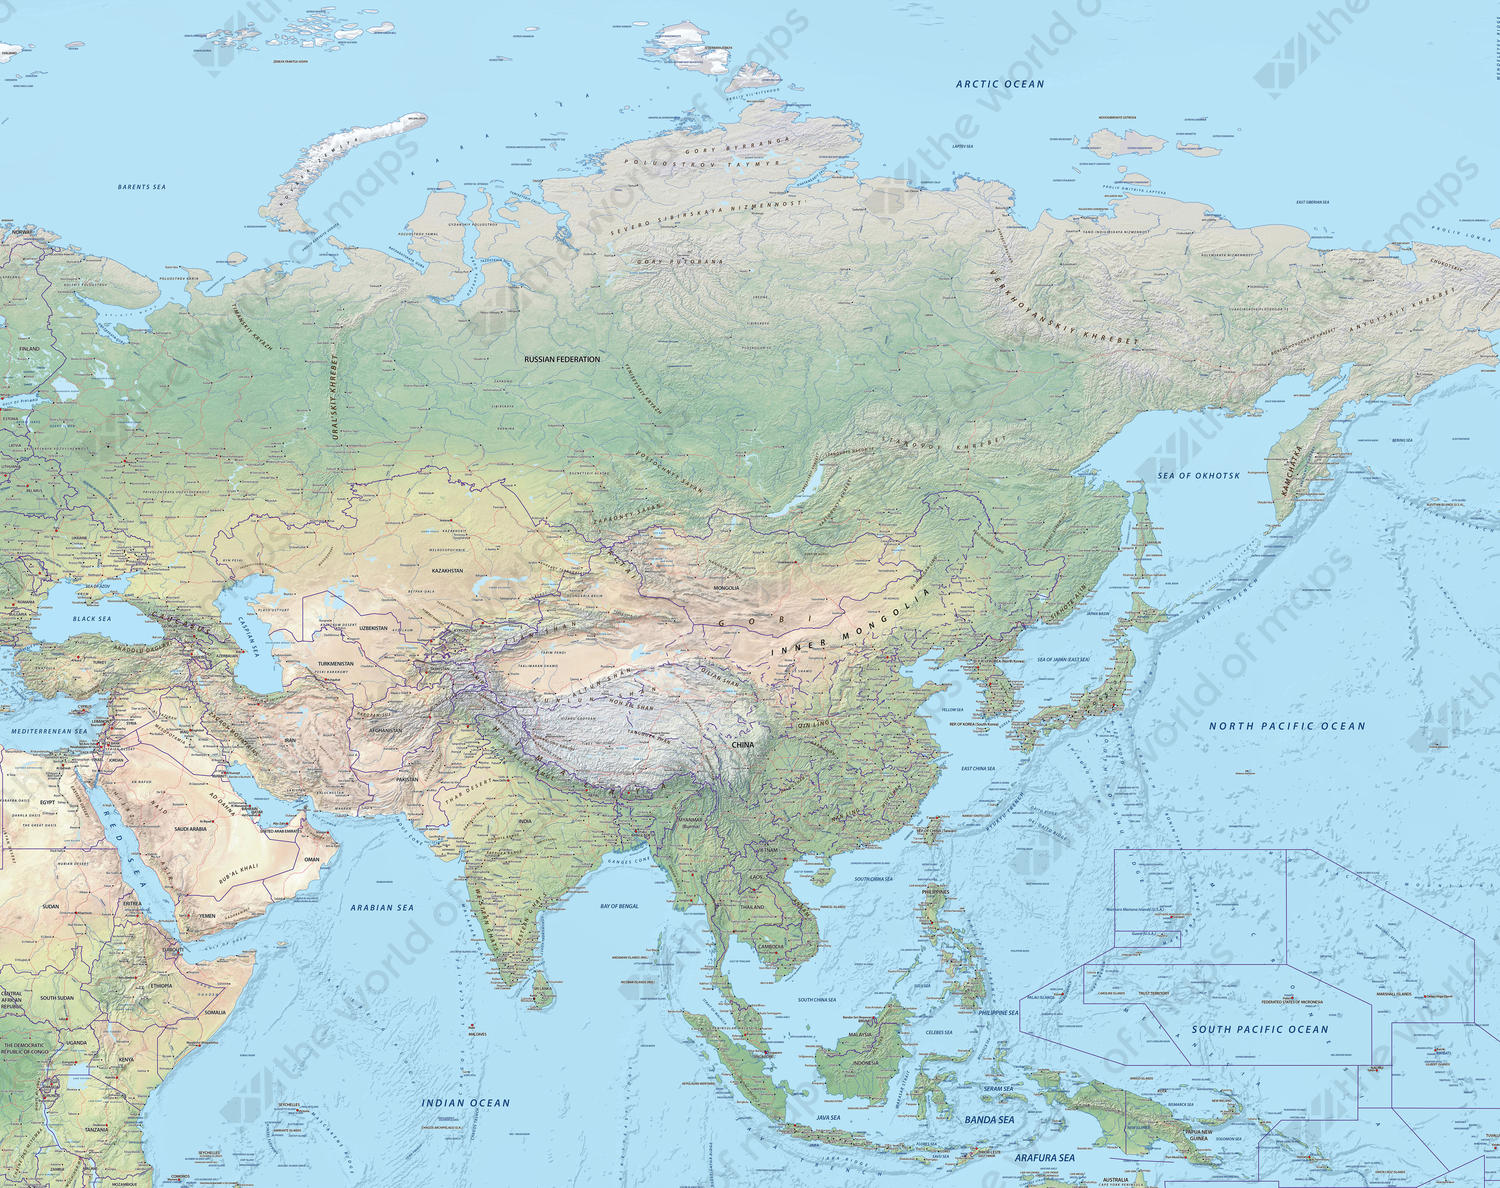 physical map of asia